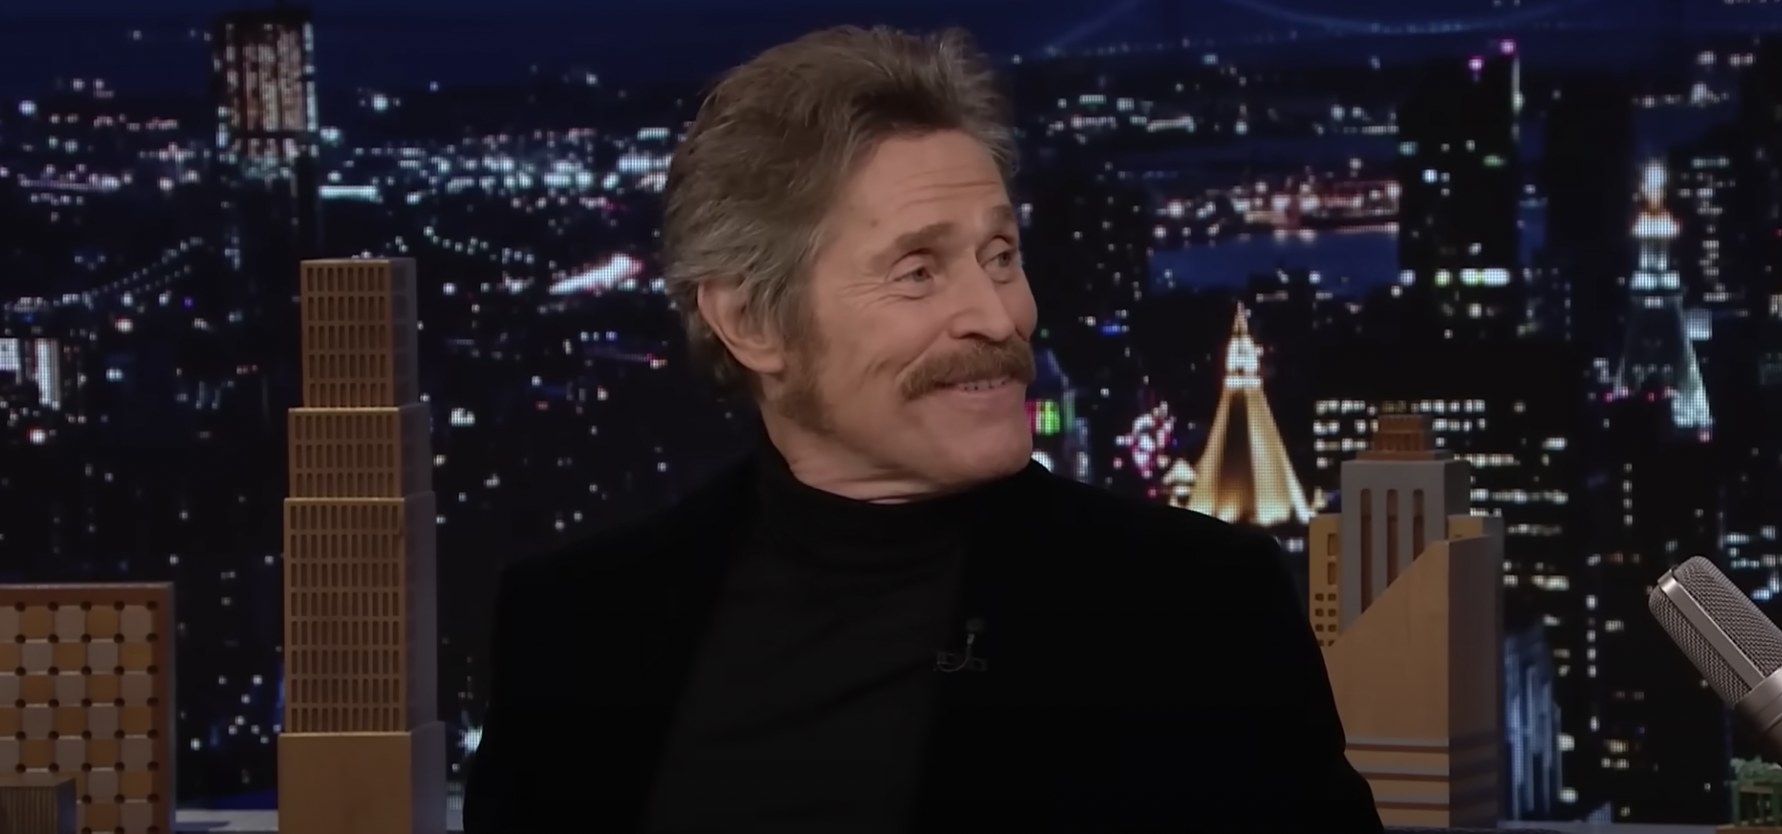 Willem Dafoe raises his eyebrows and smiles